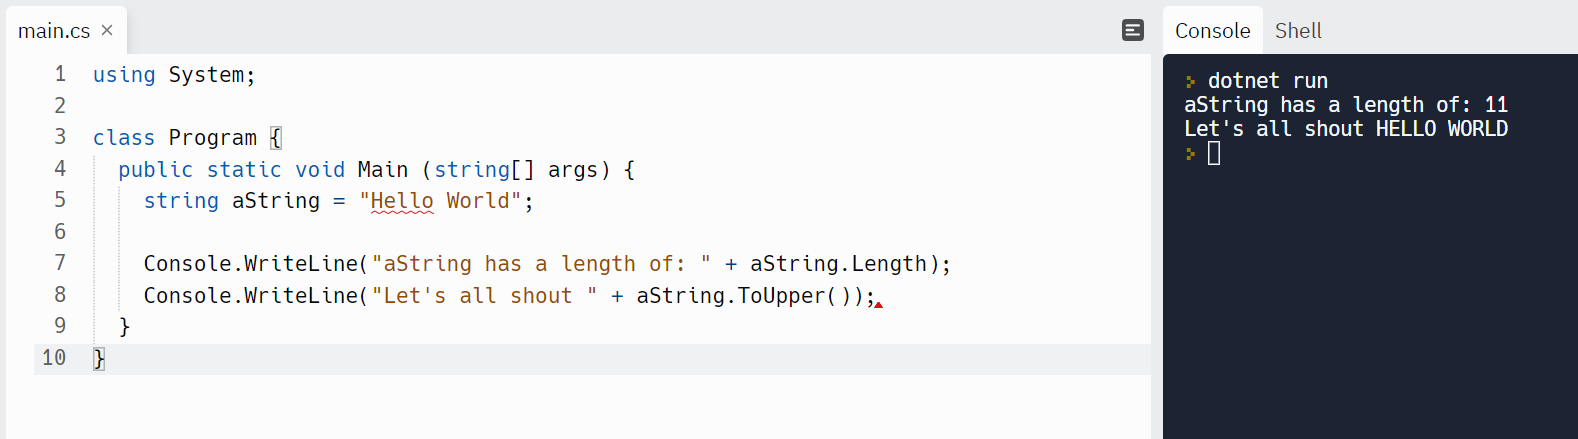 Code snippet showing the string property Length and Method ToUpper()